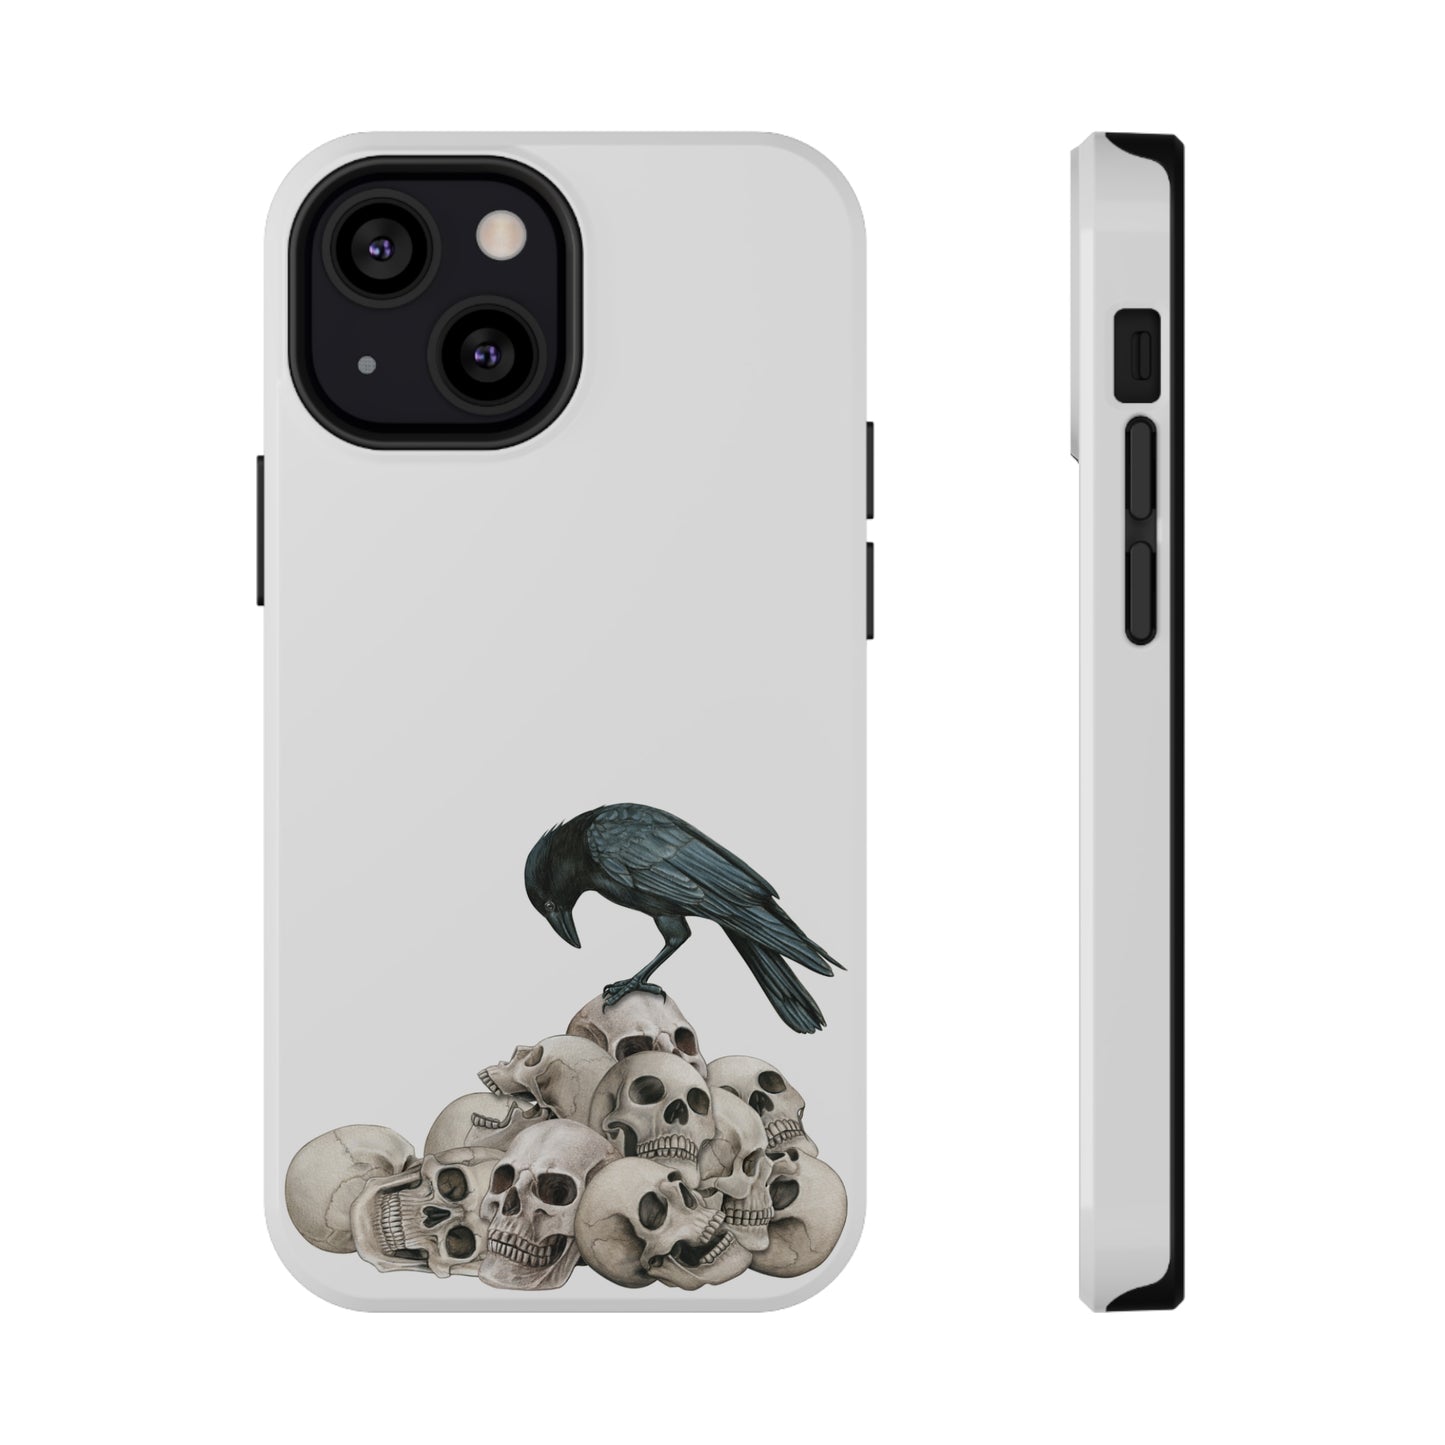 Crow On Skulls Impact-Resistant Cases for iPhones and Samsung Galaxy, Choose your model type, Glossy or Matte Finish